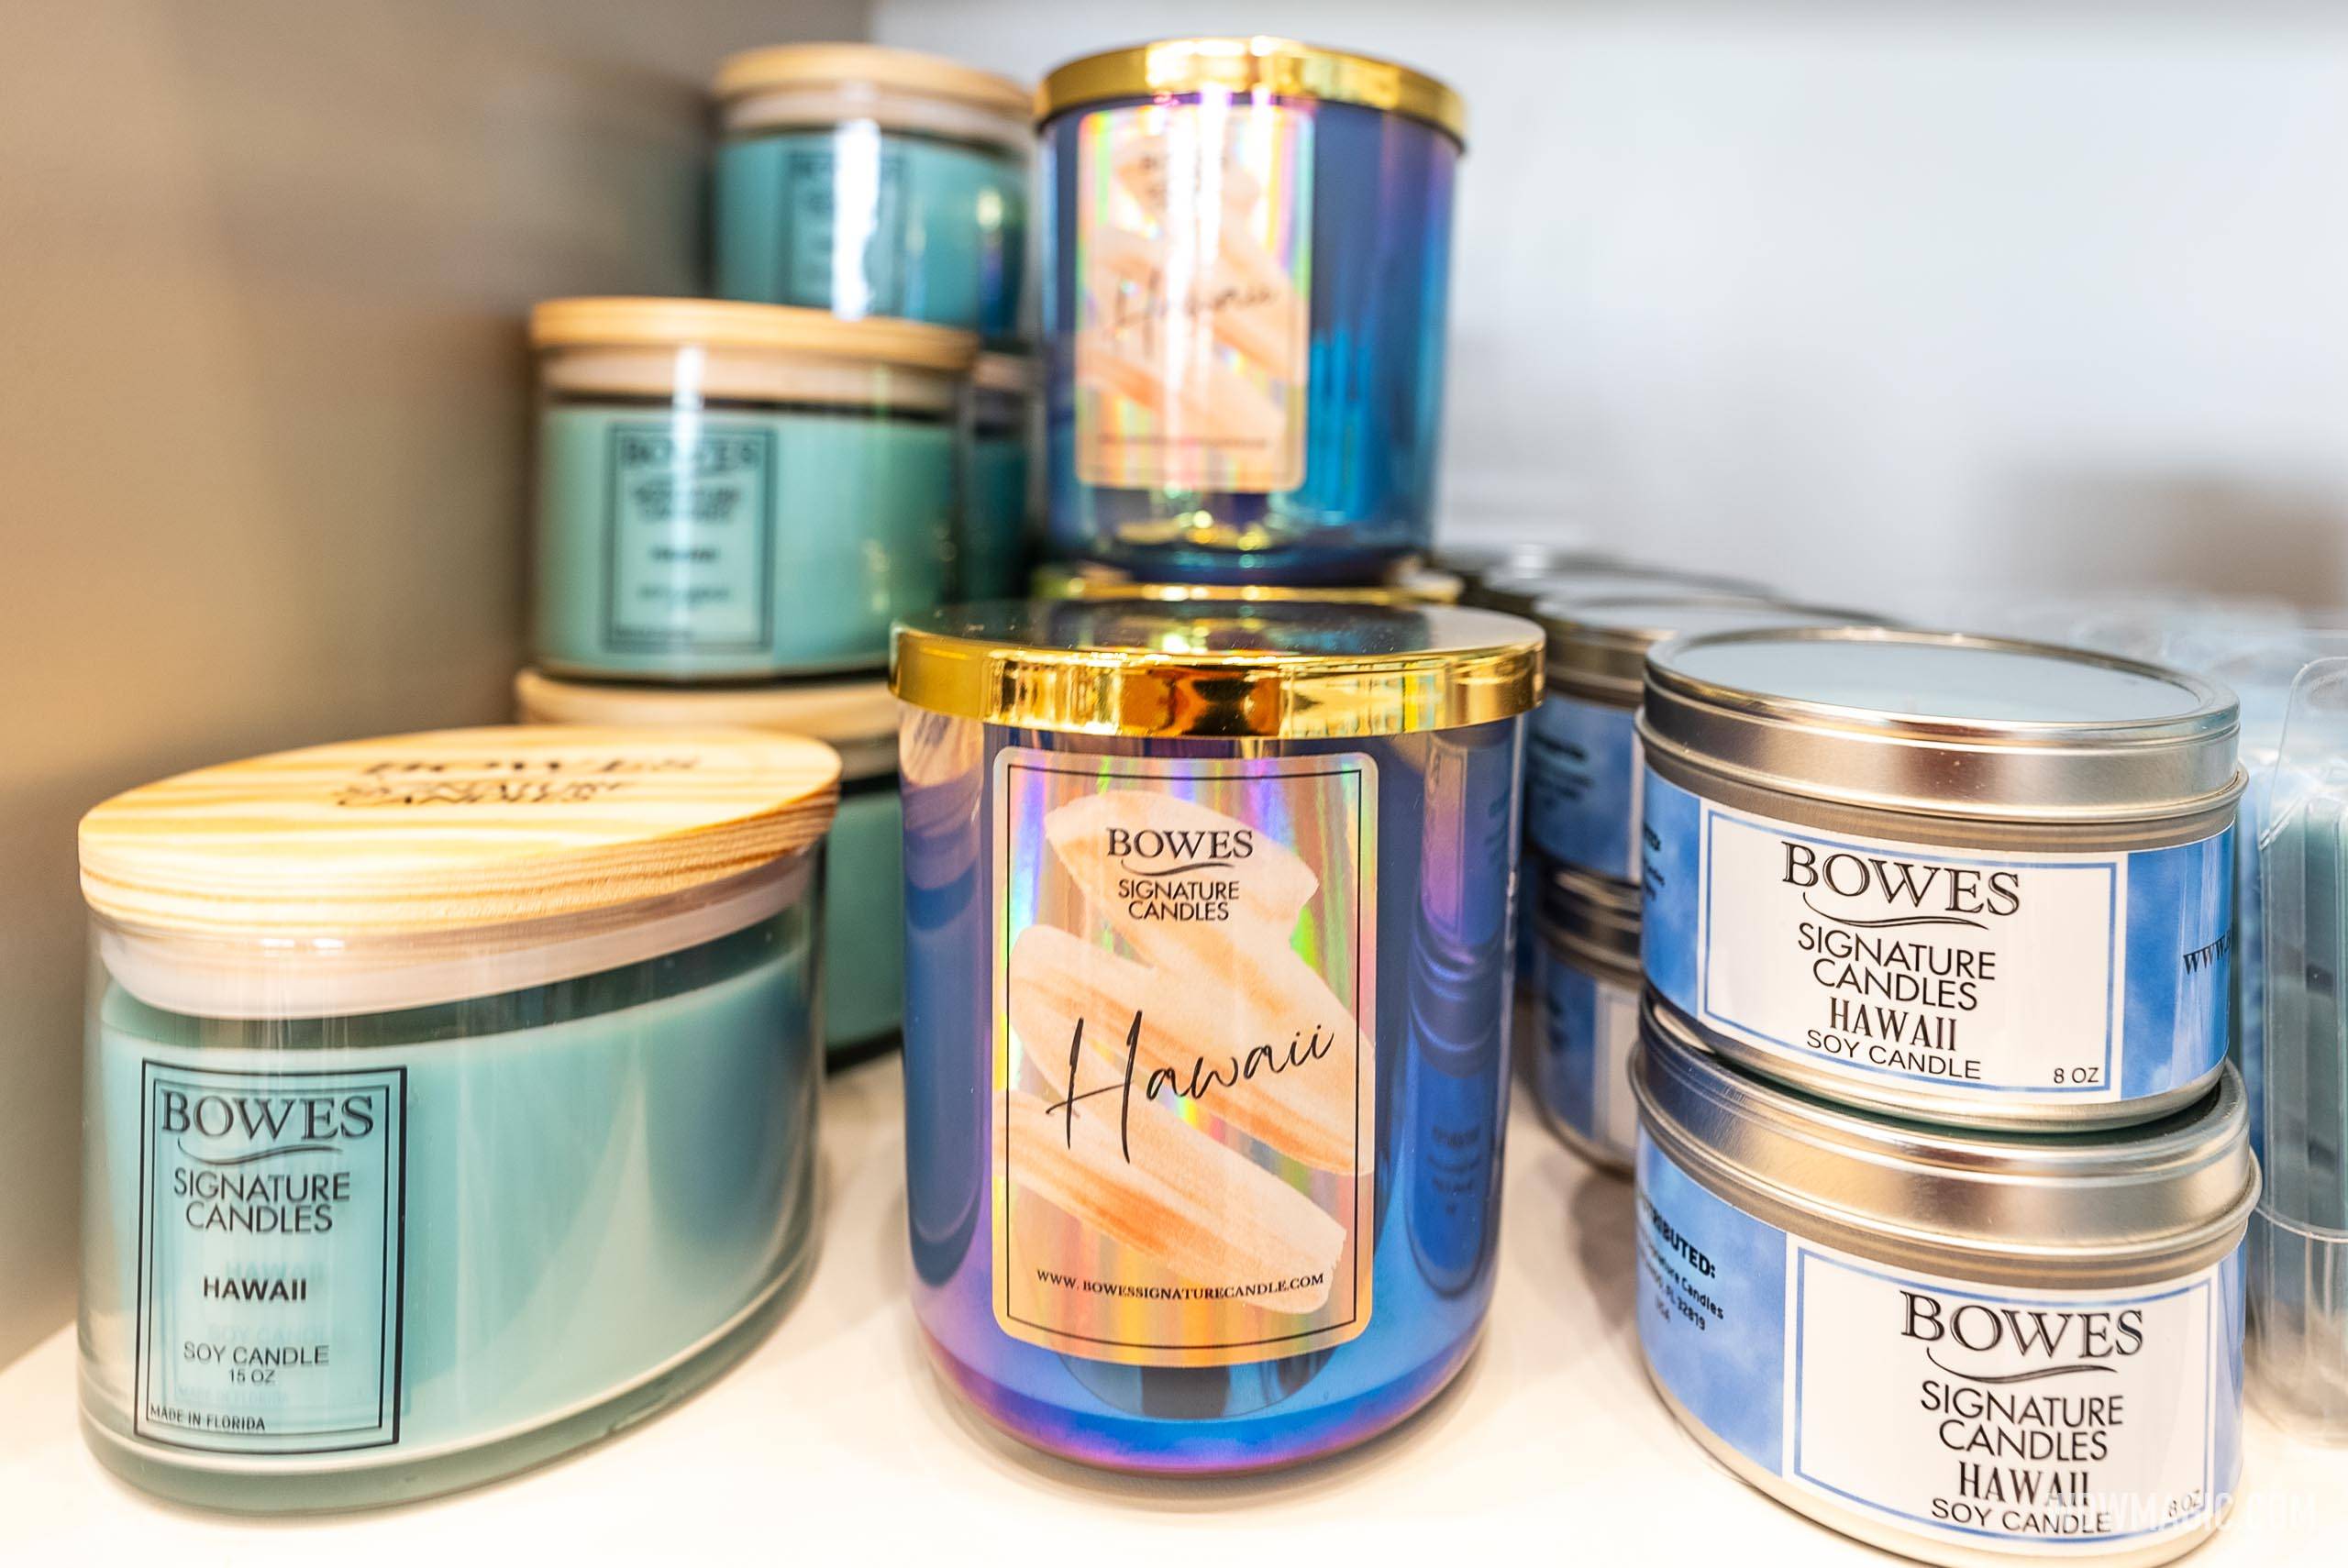 Bowes Signature Candles overview